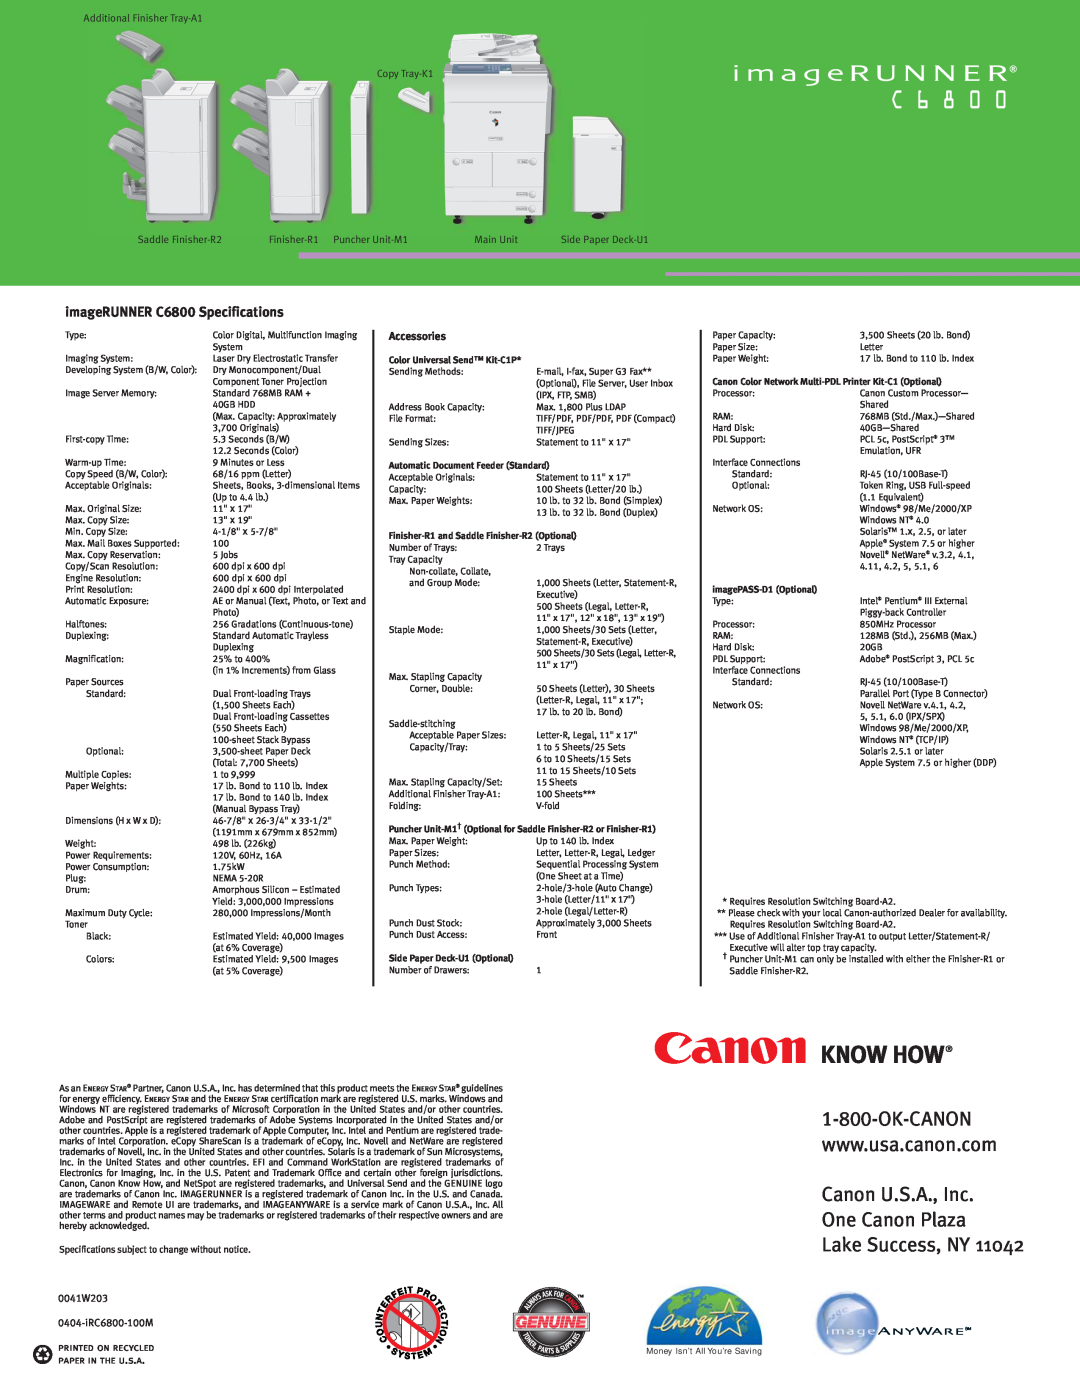 Canon manual imageRUNNER C6800 Specifications, Accessories, Additional Finisher Tray-A1 Copy Tray-K1, Saddle Finisher-R2 